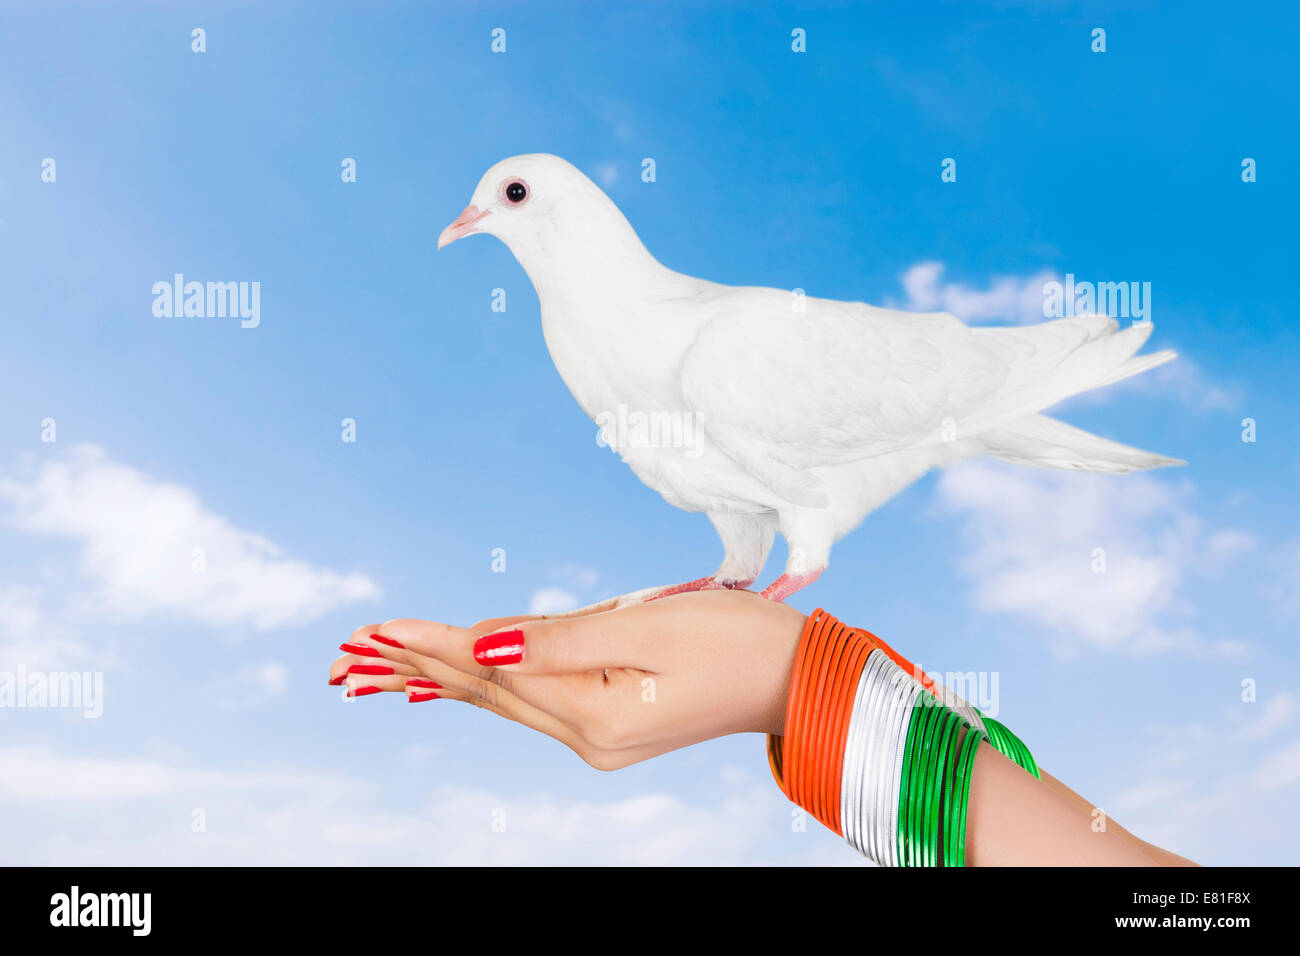 Indian Girl Flying Pigeon Banque D'Images